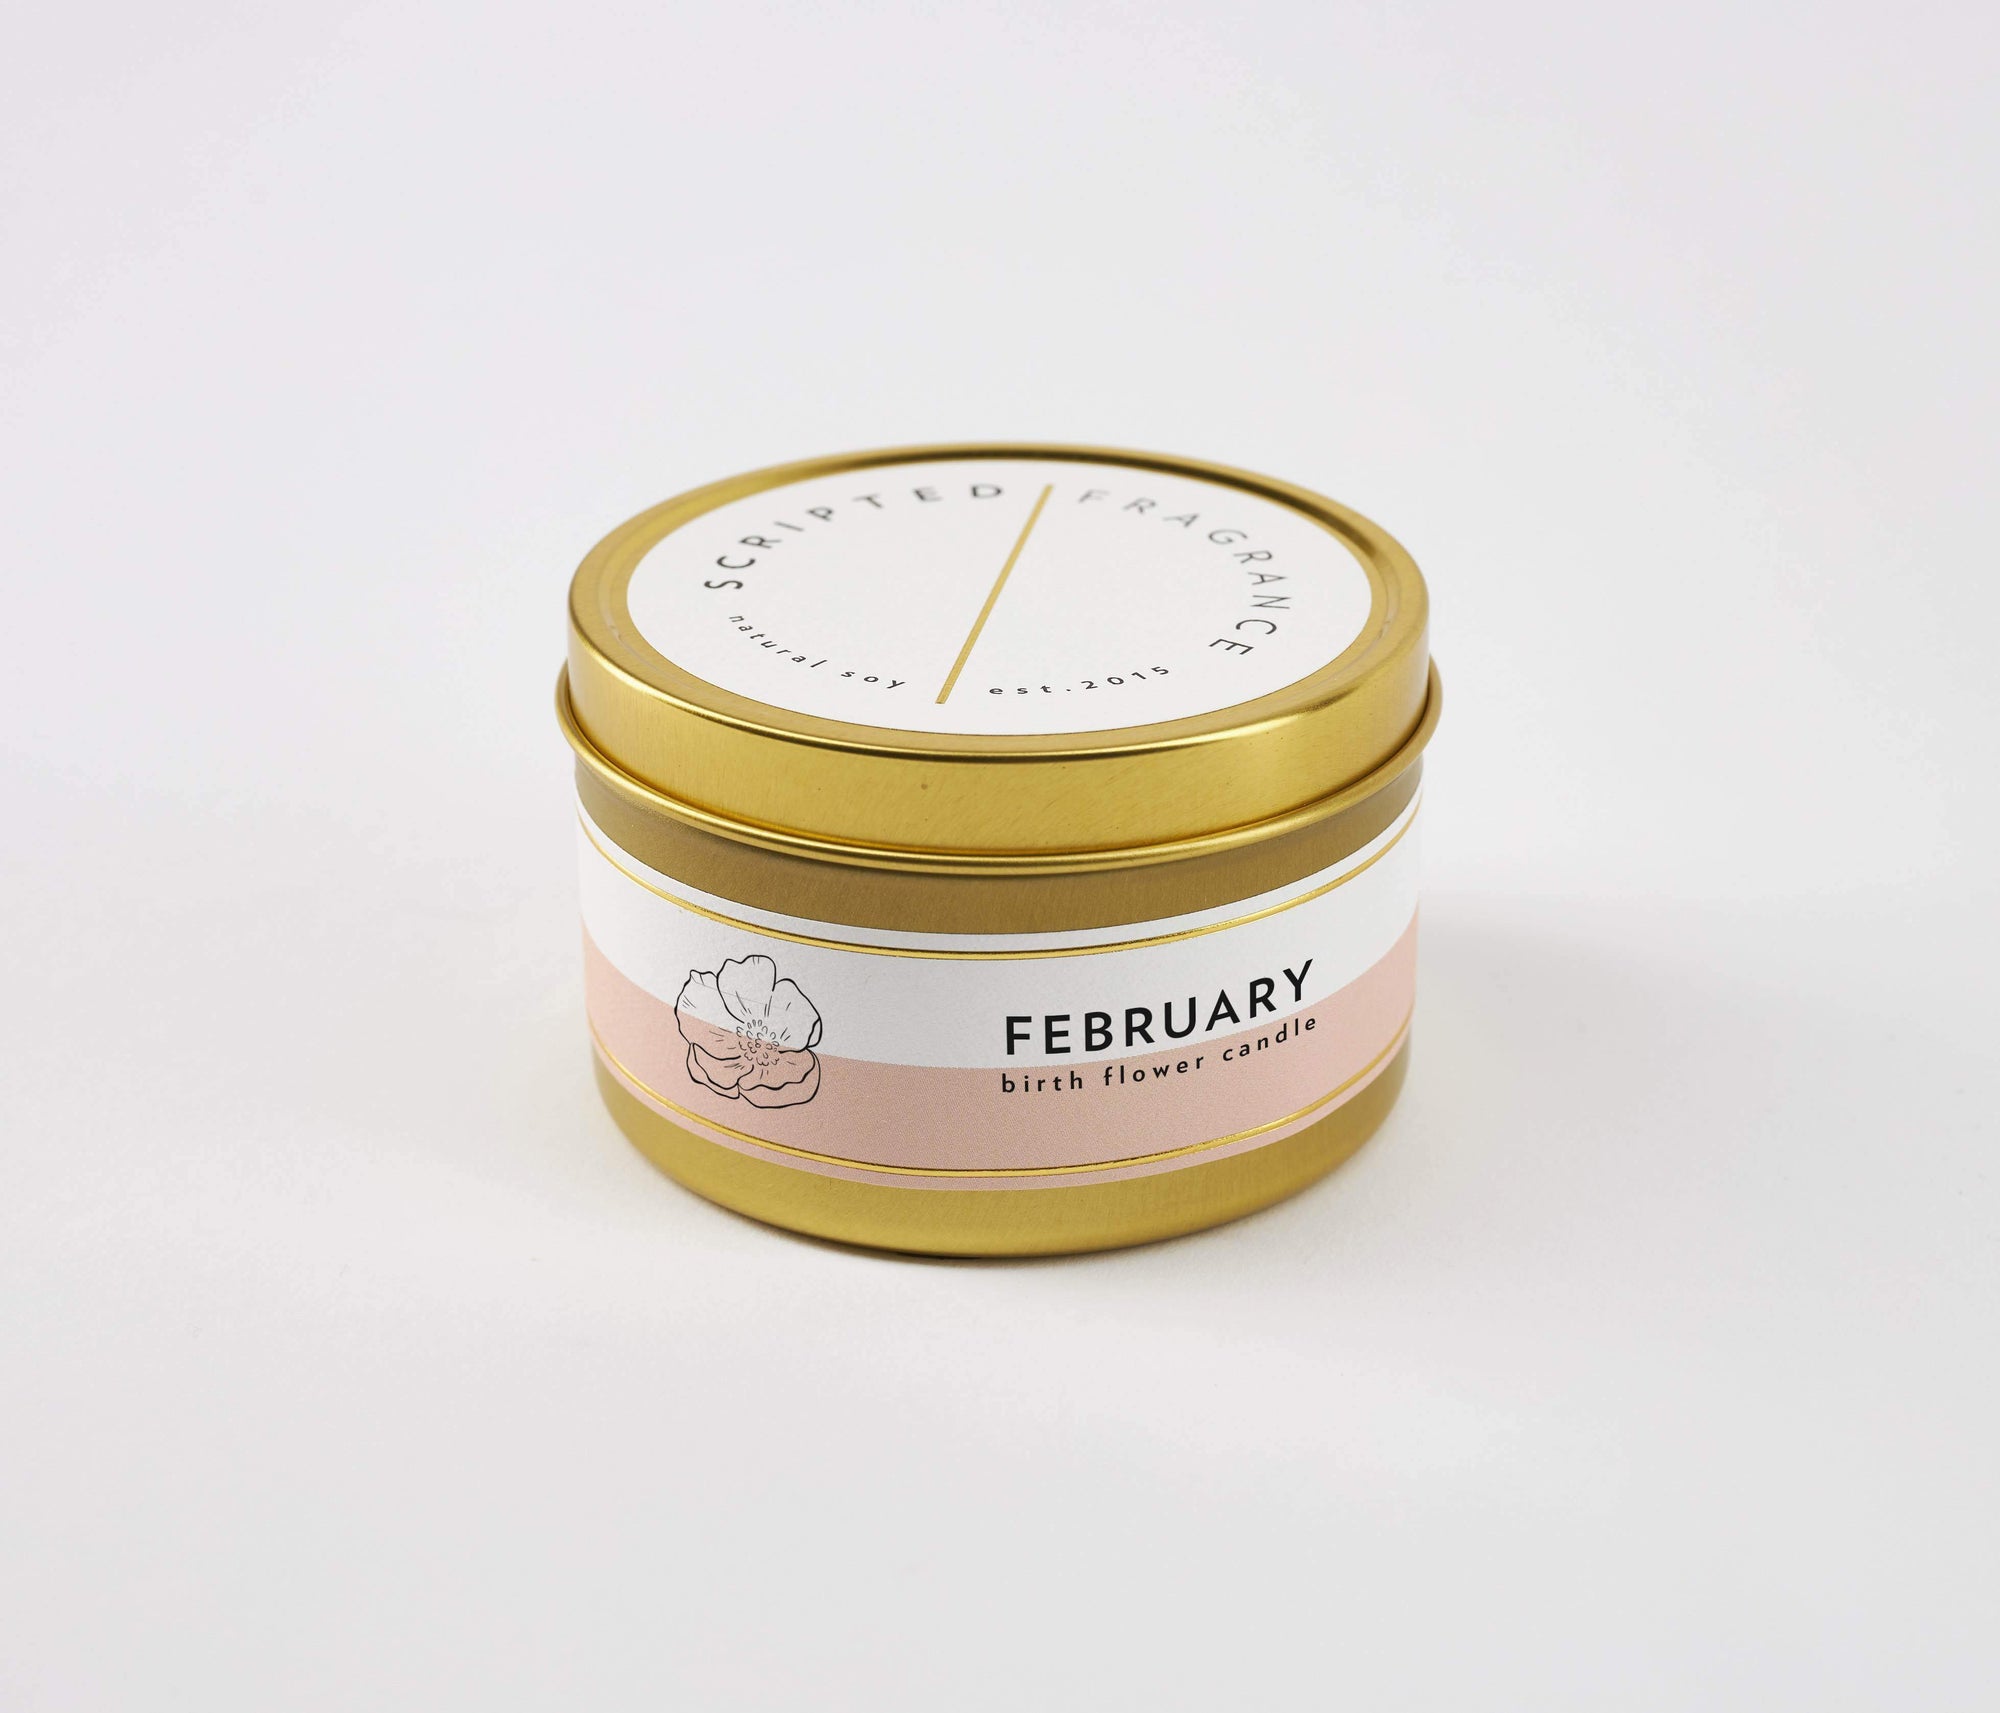 February Birth Month Flower Soy Candle, Primrose Candle